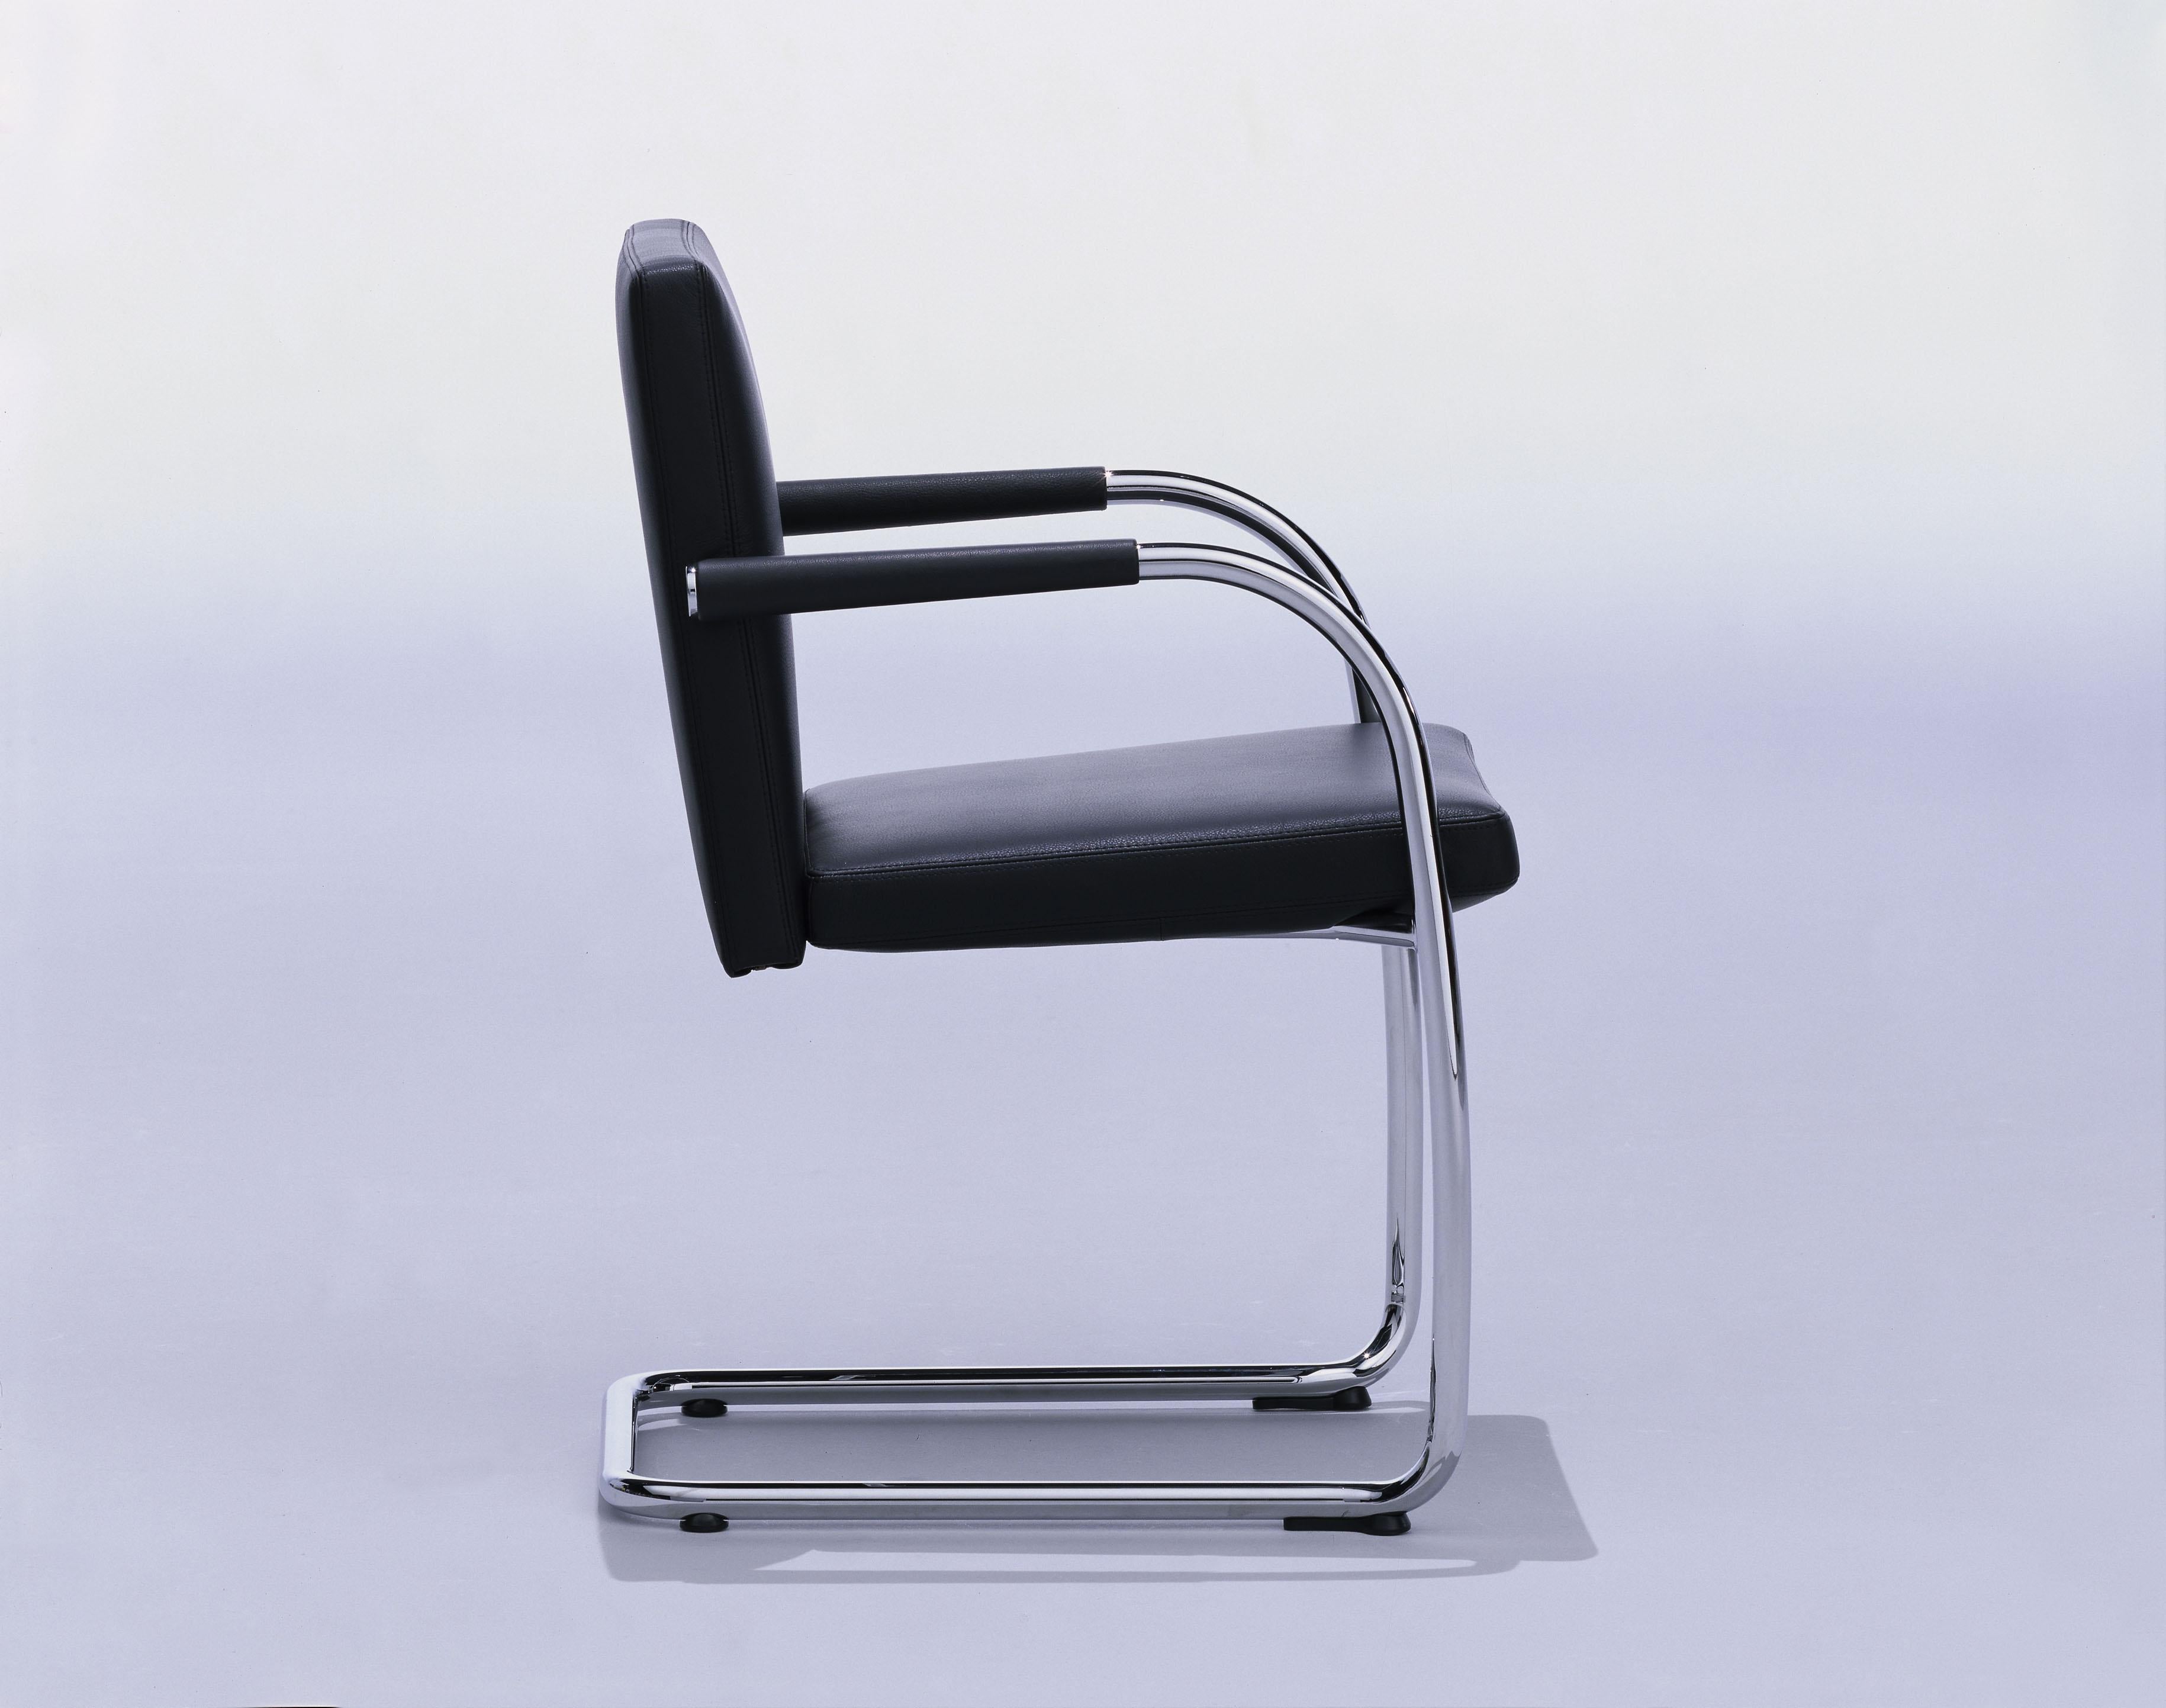 These items are currently only available in the United States.

Visasoft is an elegant visitor and conference chair which combines the typical flexing action of a Classic cantilever base with luxuriant upholstery for exceptional seating comfort. The